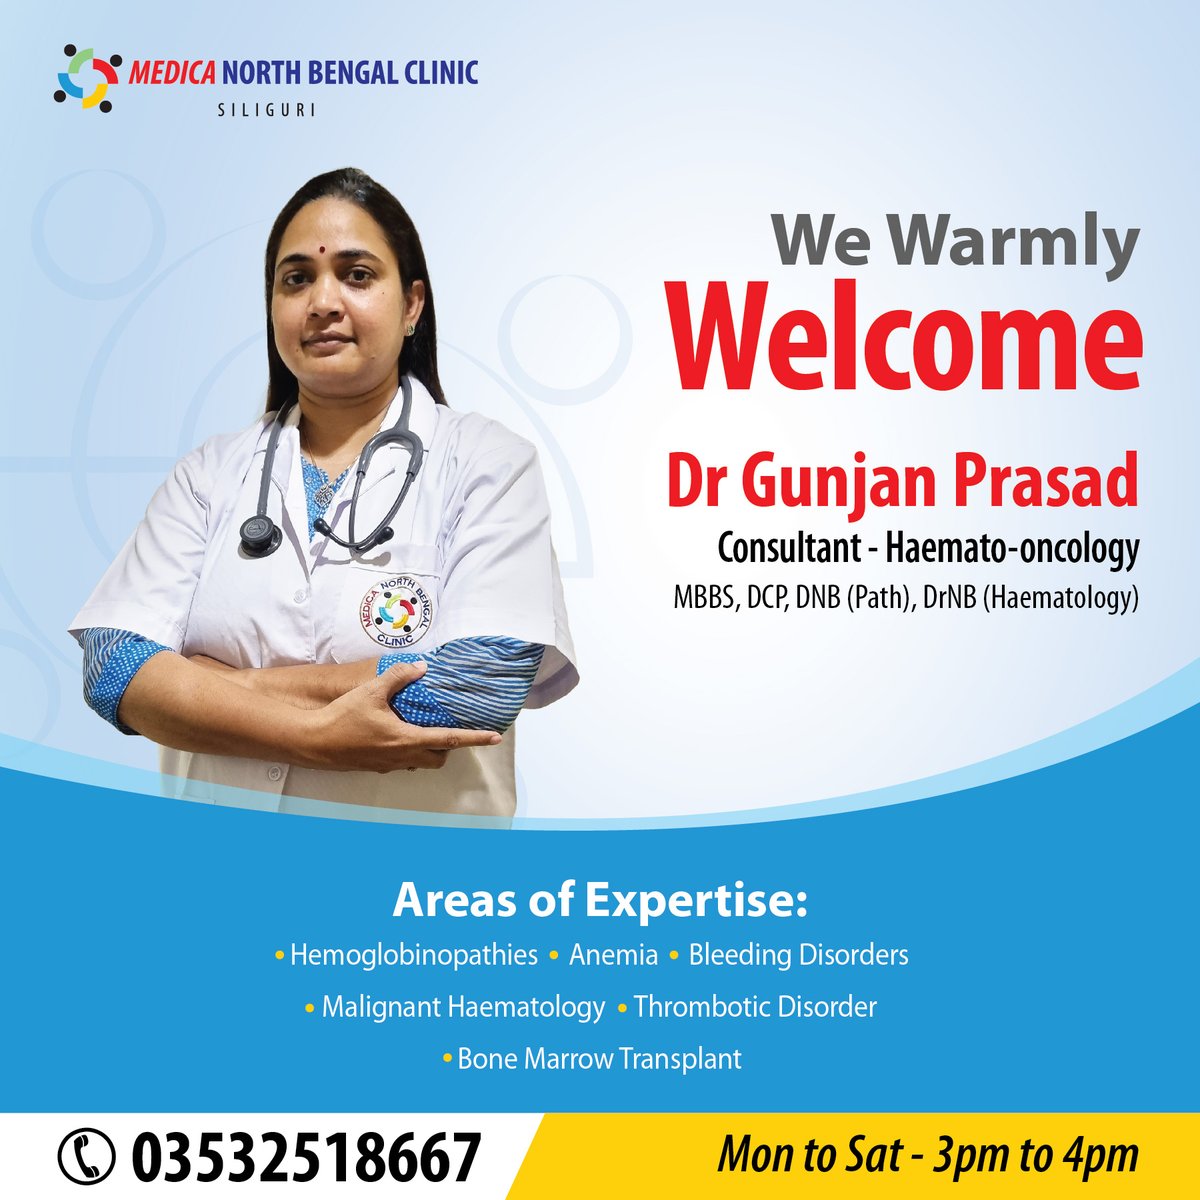 We extend a warm #welcome to Dr. Gunjan Prasad, Consultant (Haemato-oncology), at Medica North Bengal Clinic.
To know more or Book an Appointment, visit: bit.ly/4cXEMwq

#medica #medicahospital #hematology #oncology #hematologist #anemia #healthylife #livehealthy